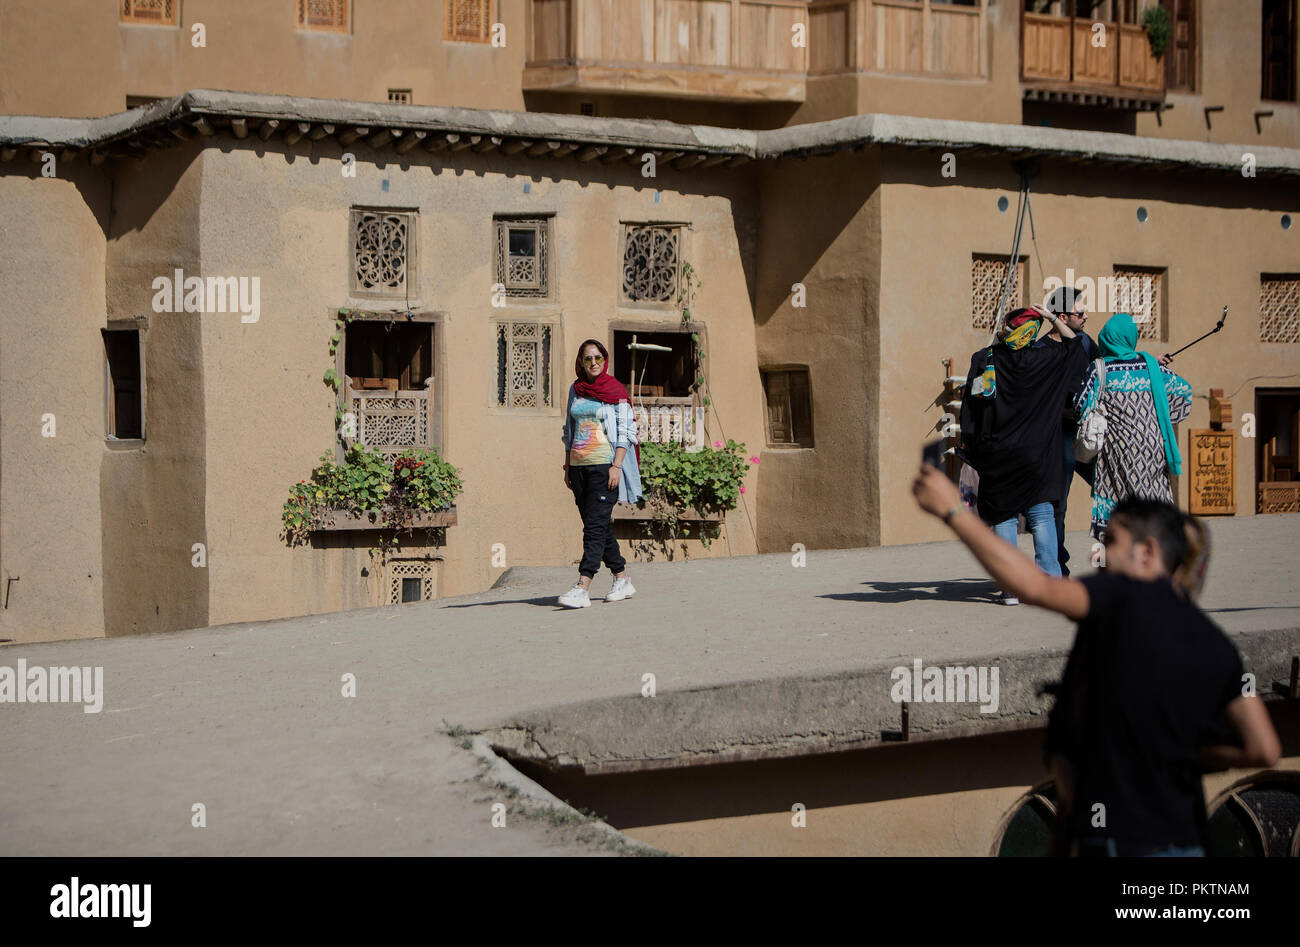 Masouleh, Iran. 14th Sep, 2018. Tourists visit Masouleh, northern Iran, on Sept. 14, 2018. The historical town of Masouleh, famous for its interconnected buildings and courtyards and roofs serving as pedestrian areas similar to streets, has an attractive nature and architecture with an antiquity of more than 1,000 years. Credit: Ahmad Halabisaz/Xinhua/Alamy Live News Stock Photo